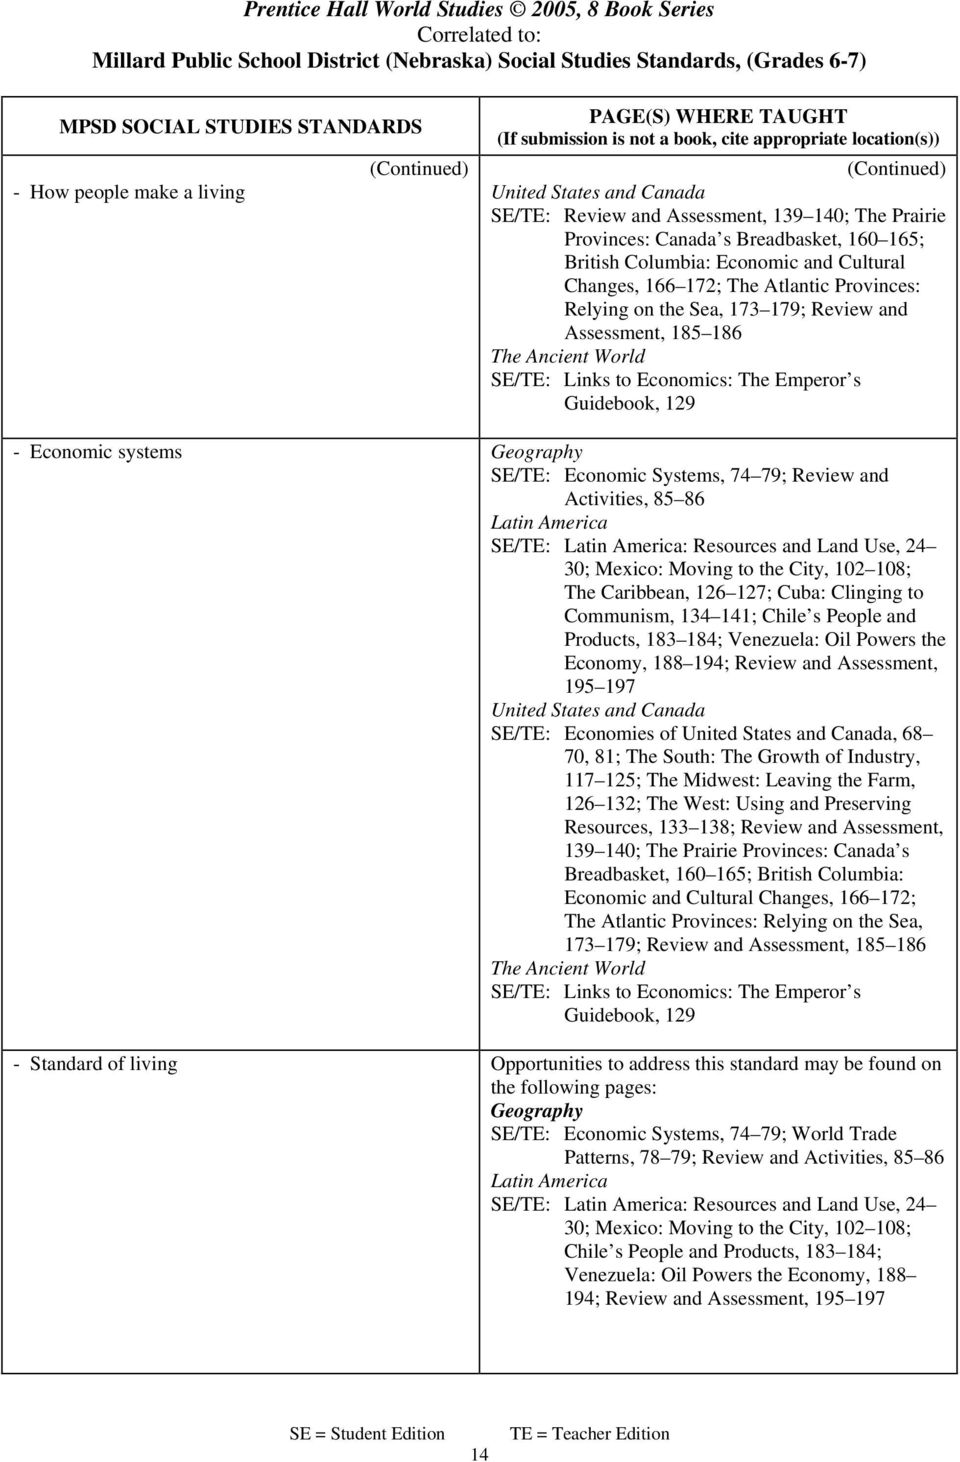 Activities, 85 86 SE/TE: : Resources and Land Use, 24 30; Mexico: Moving to the City, 102 108; The Caribbean, 126 127; Cuba: Clinging to Communism, 134 141; Chile s People and Products, 183 184;